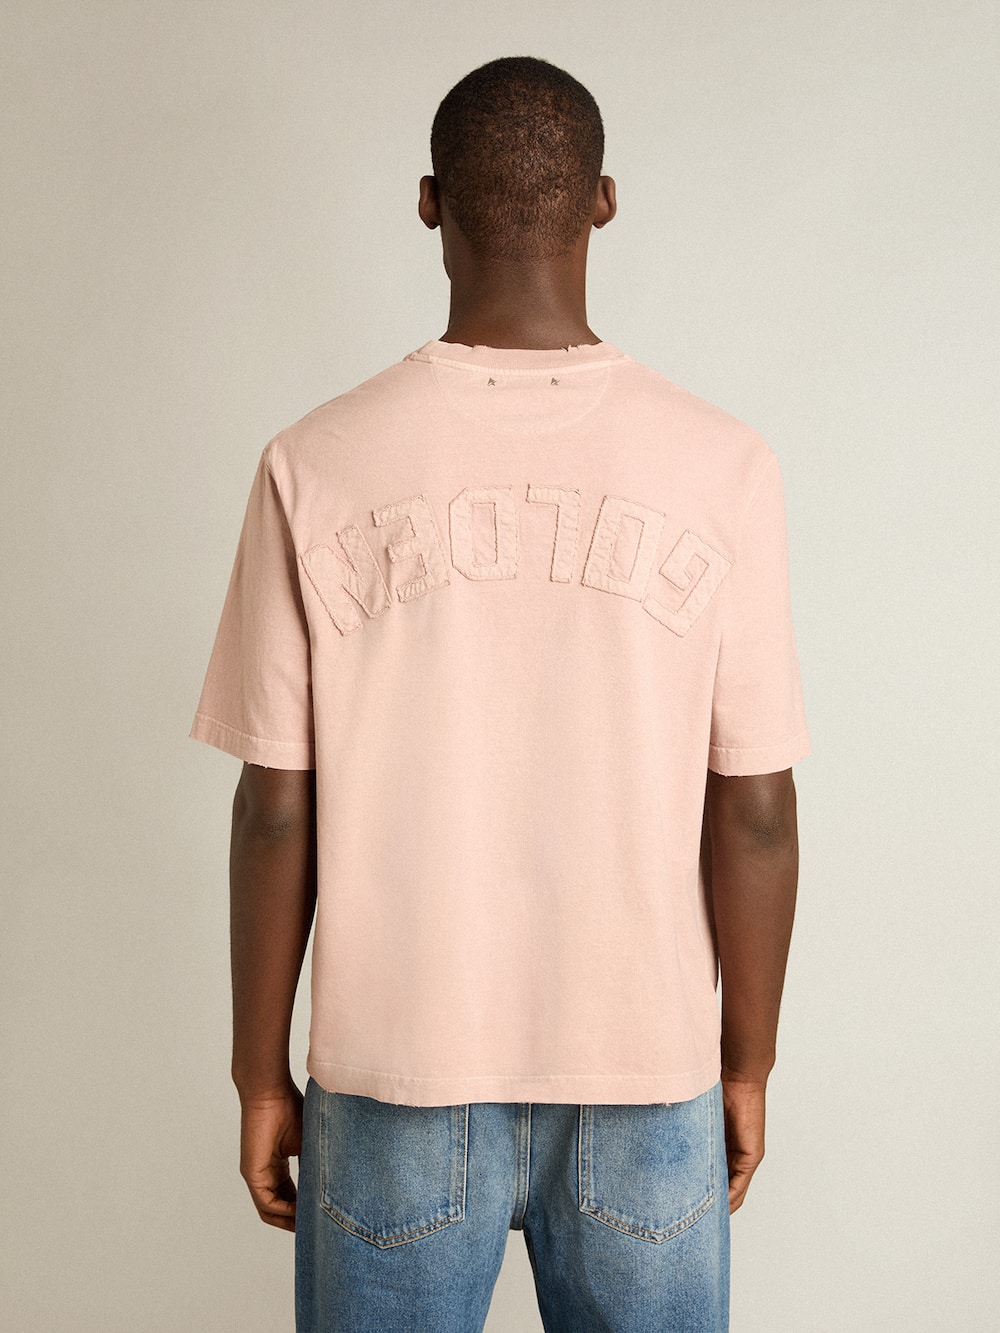 Golden Goose - Powder-pink T-shirt with reverse logo on the back - Asian fit in 